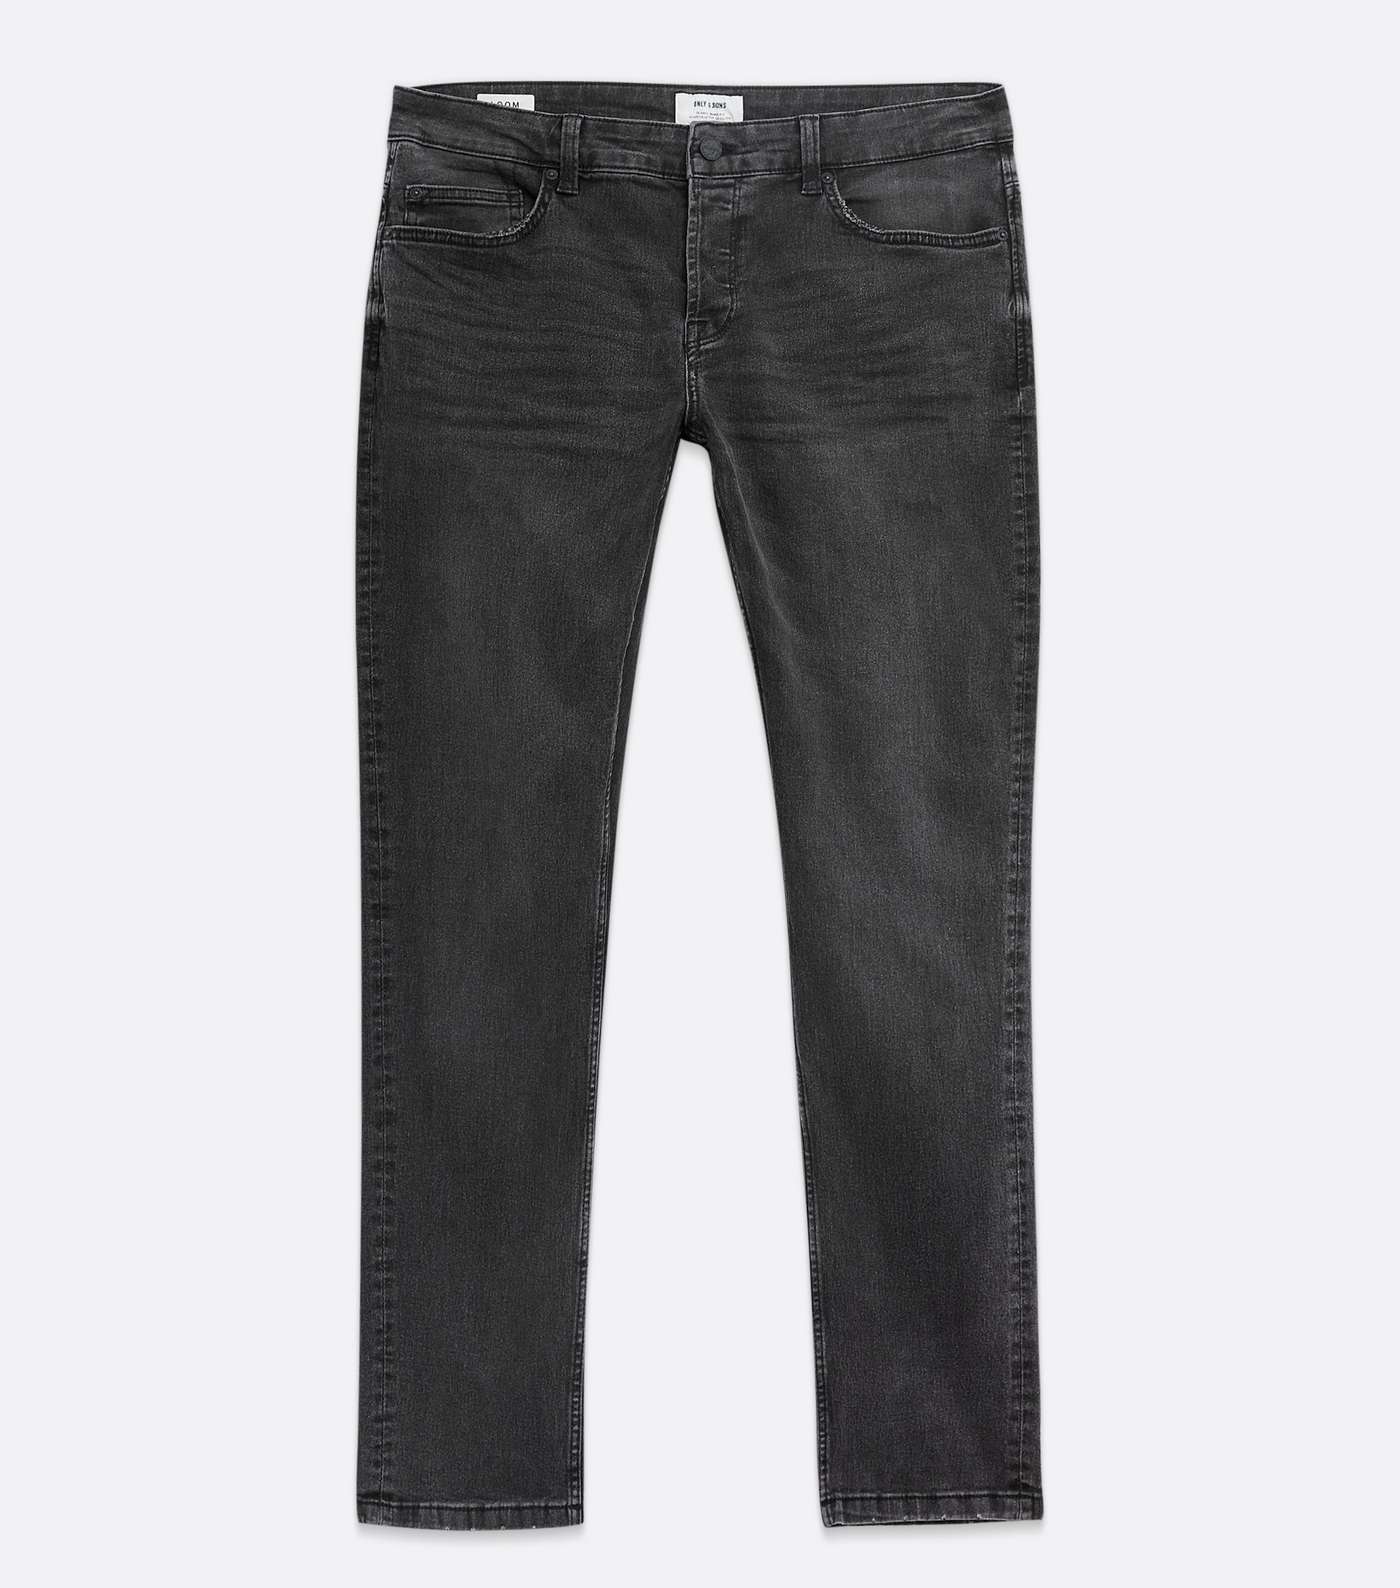 Only & Sons Dark Grey Slim Fit Jeans Image 5